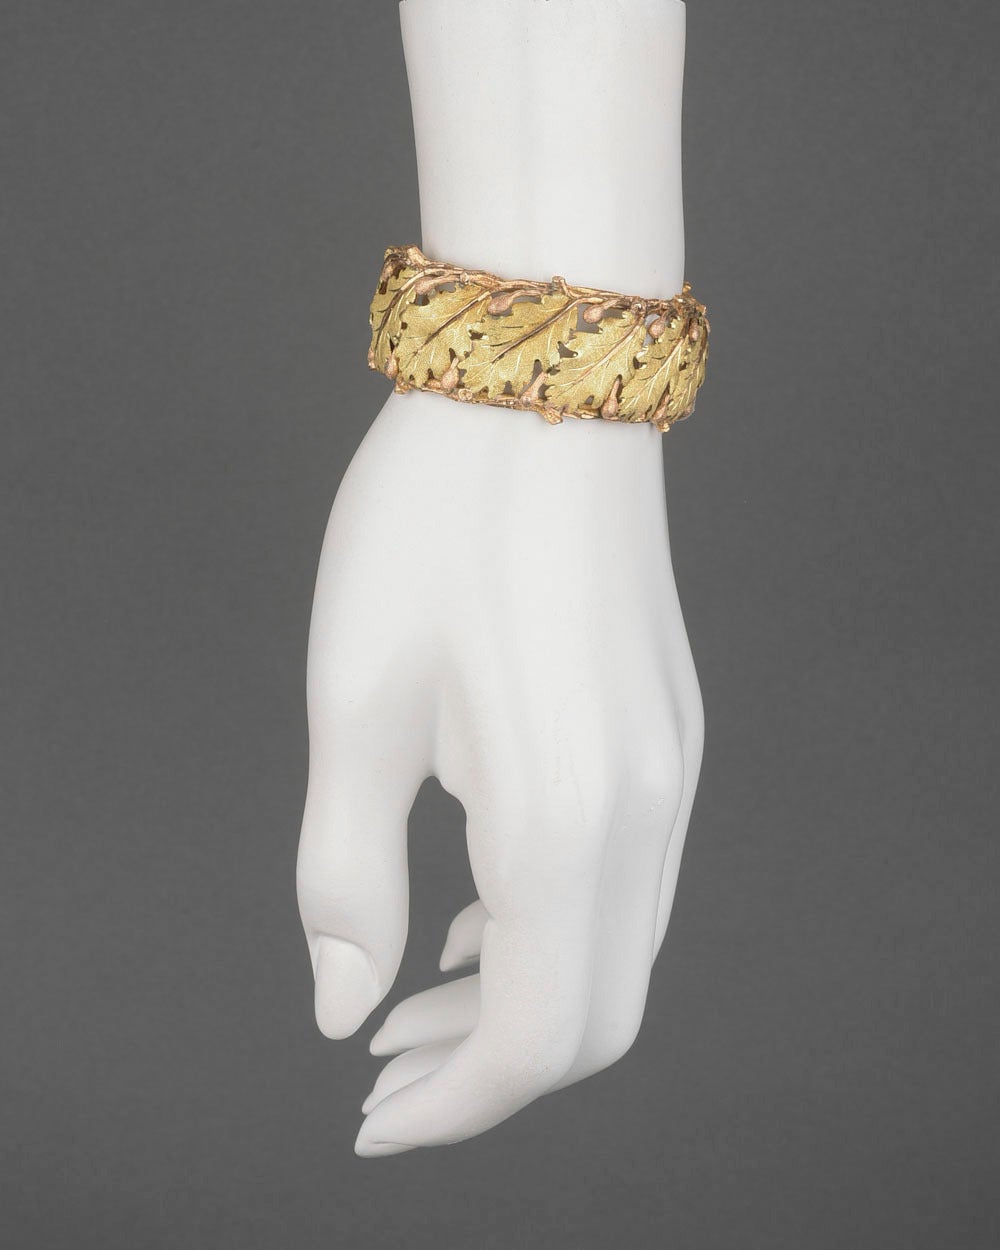 Oval-shaped, openwork oak leaf cuff bracelet, in hand-textured and engraved 18k yellow and pink gold, with hinge on one side, signed Mario Buccellati. 0.85